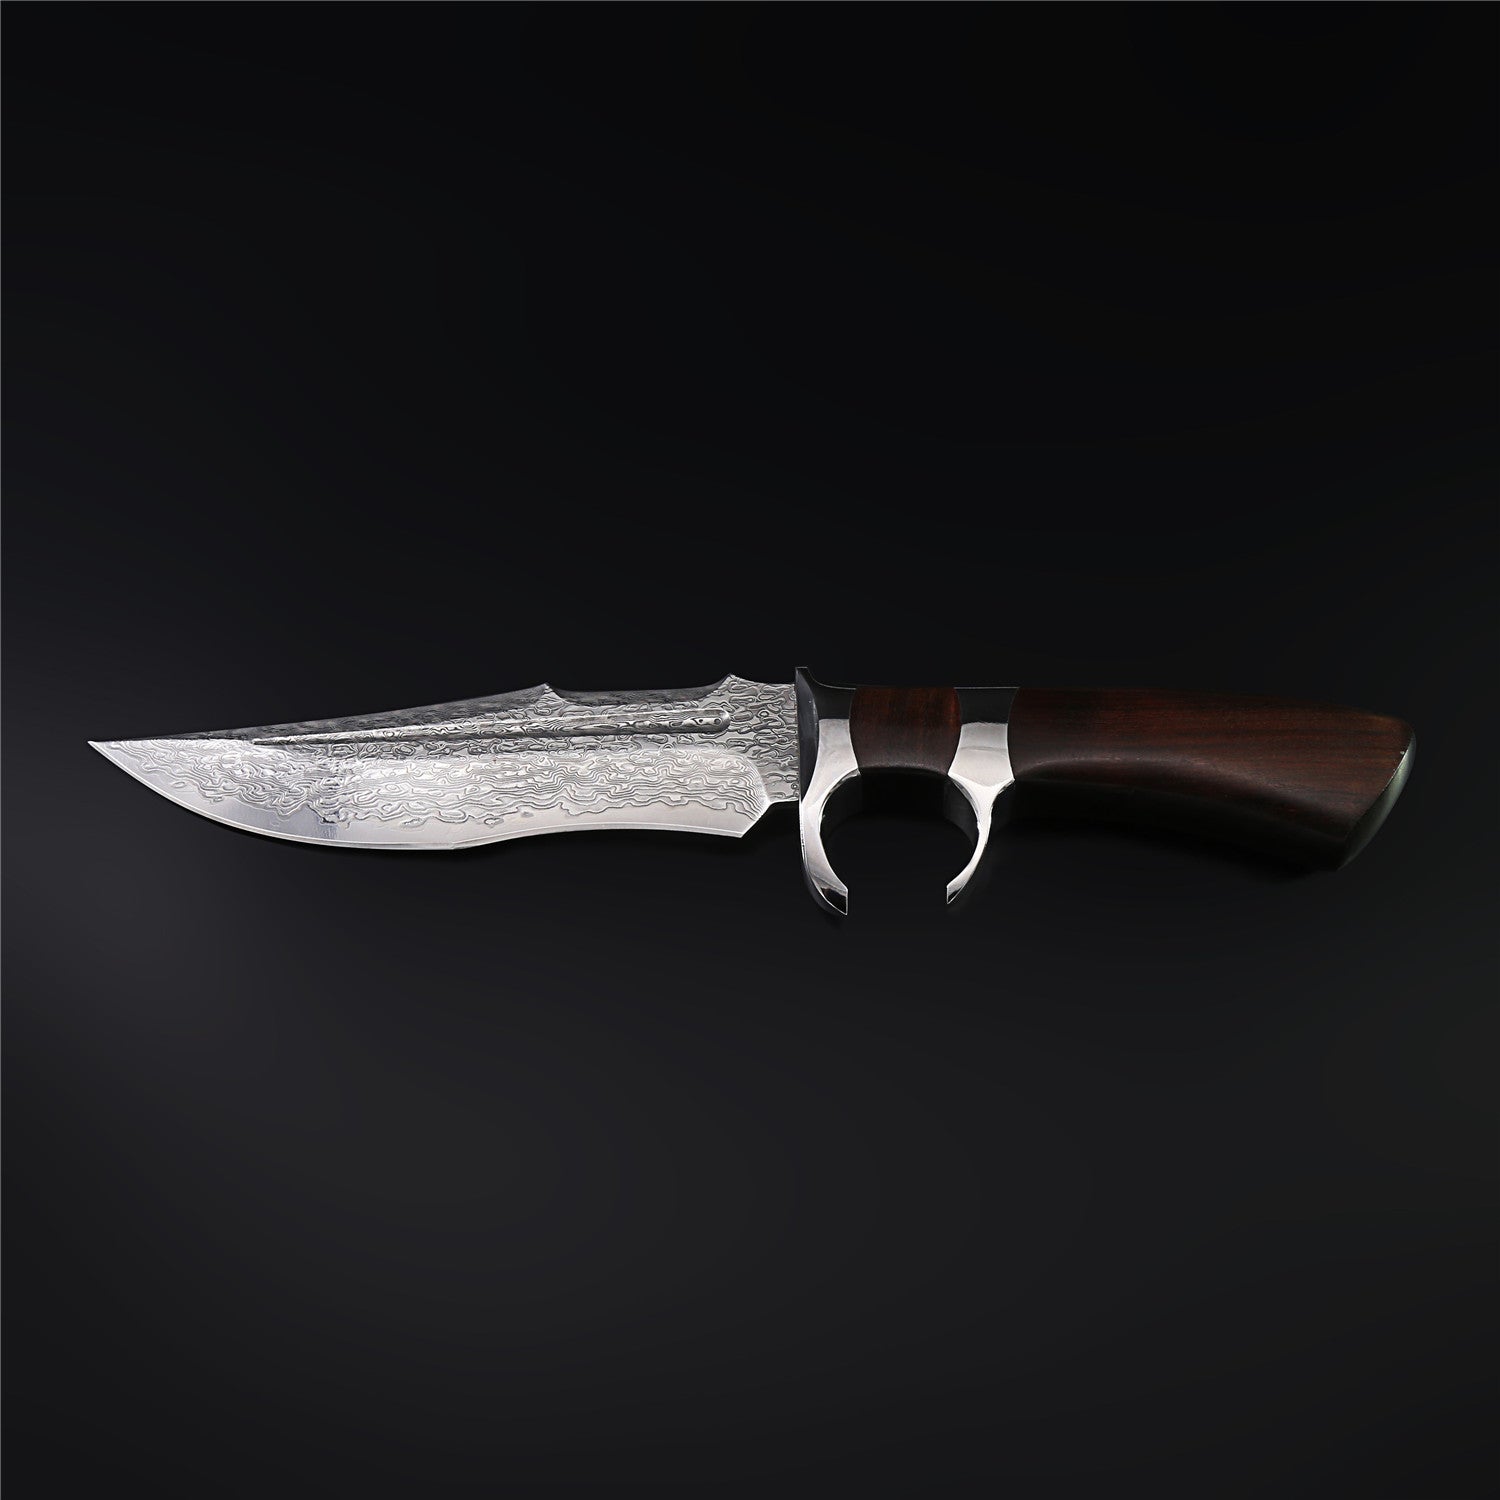 The Zeal Damascus Steel Fixed Blade